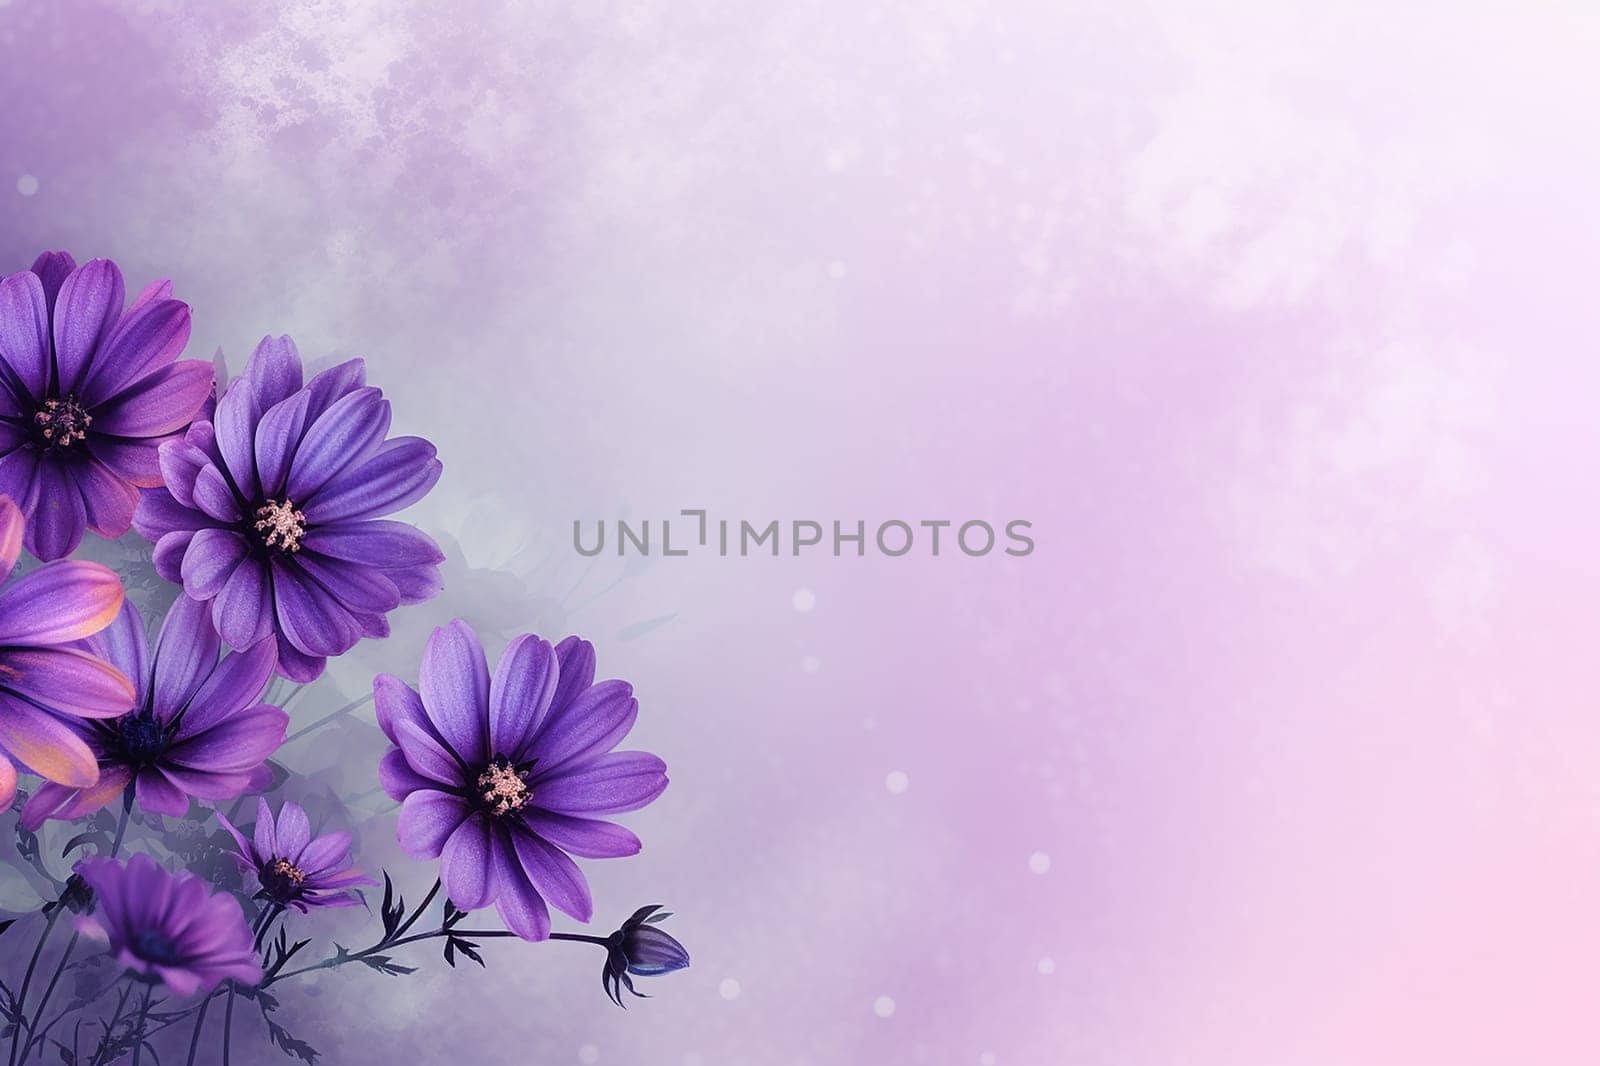 Purple flowers with a soft pastel background by Hype2art